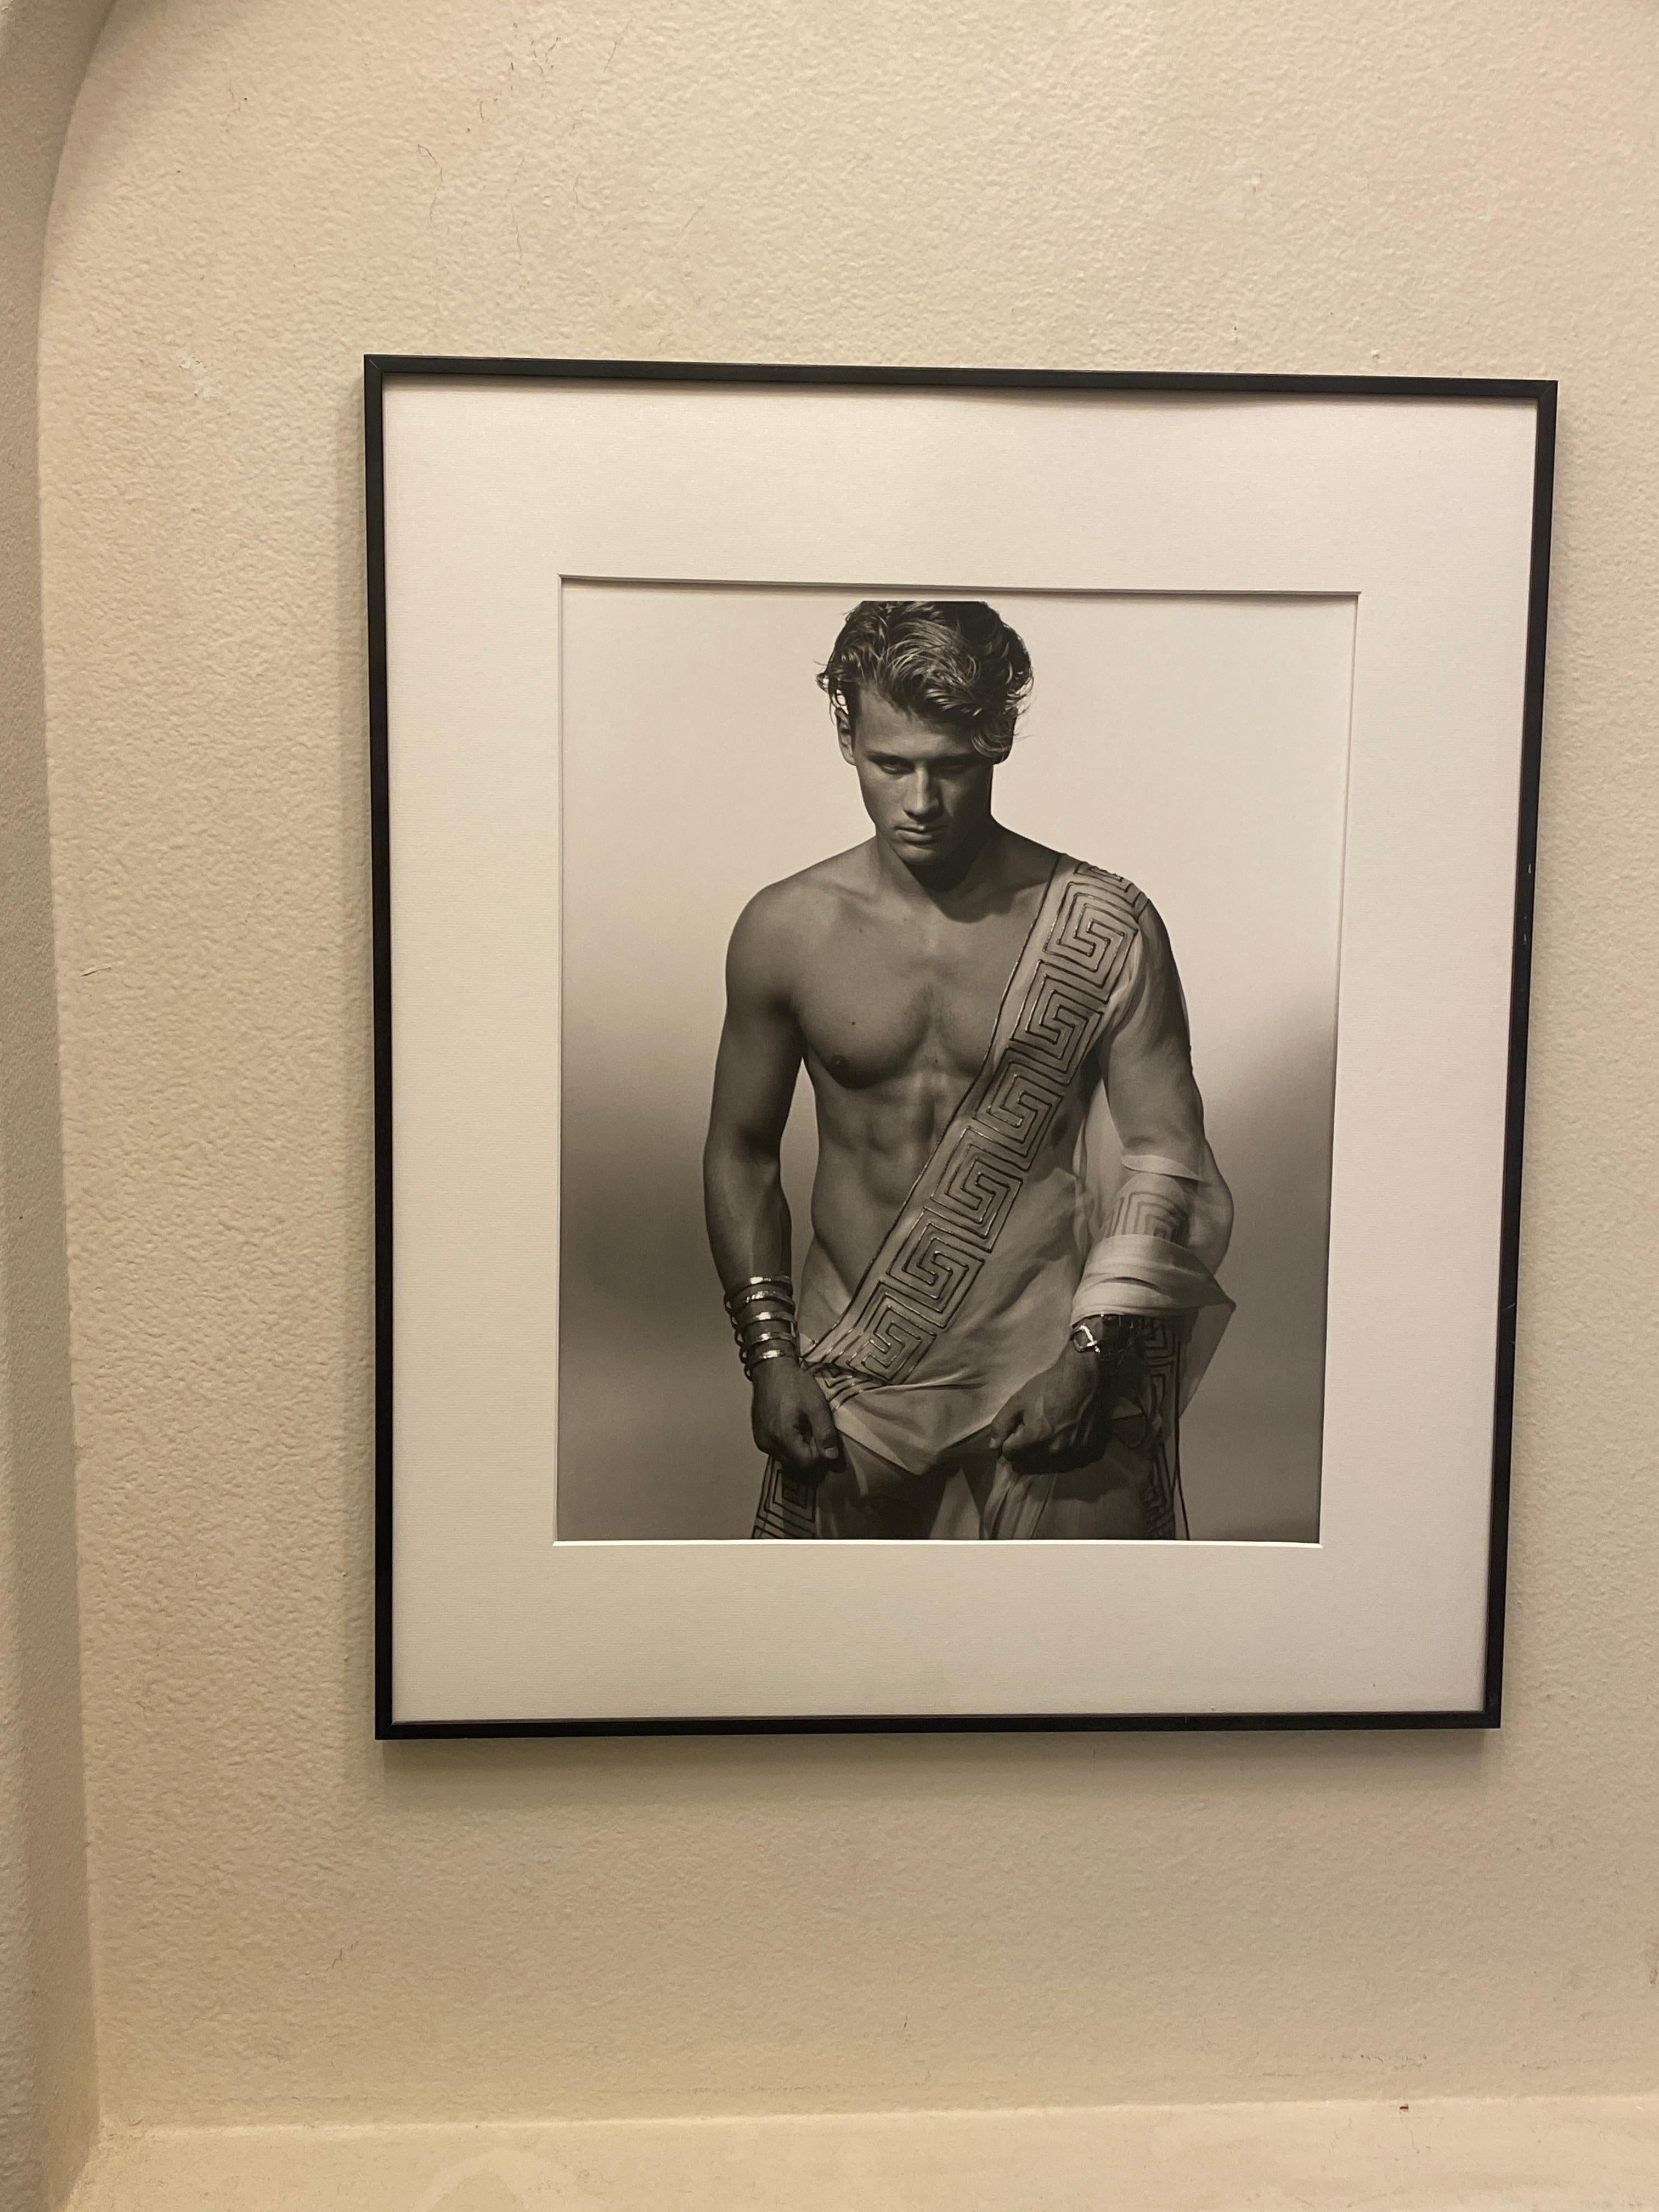 PLEASE NOTE:
This original photo from the amazing Michael Roberts exhibition at Hamilton's Gallery in London, England of 